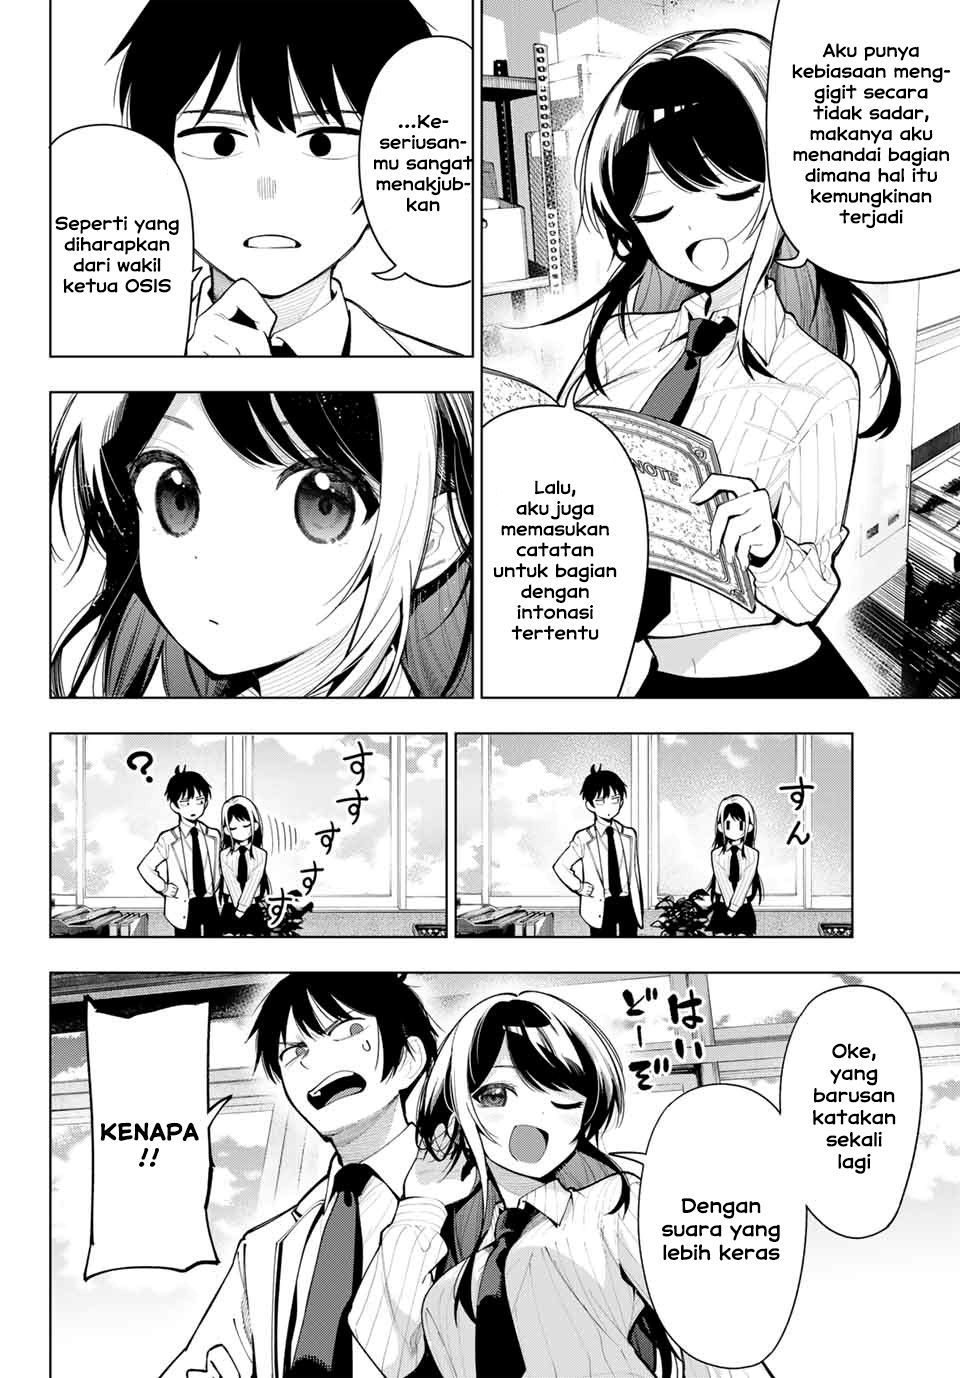 Mayonaka Heart Tune (Tune In to the Midnight Heart) Chapter 02 Image 11